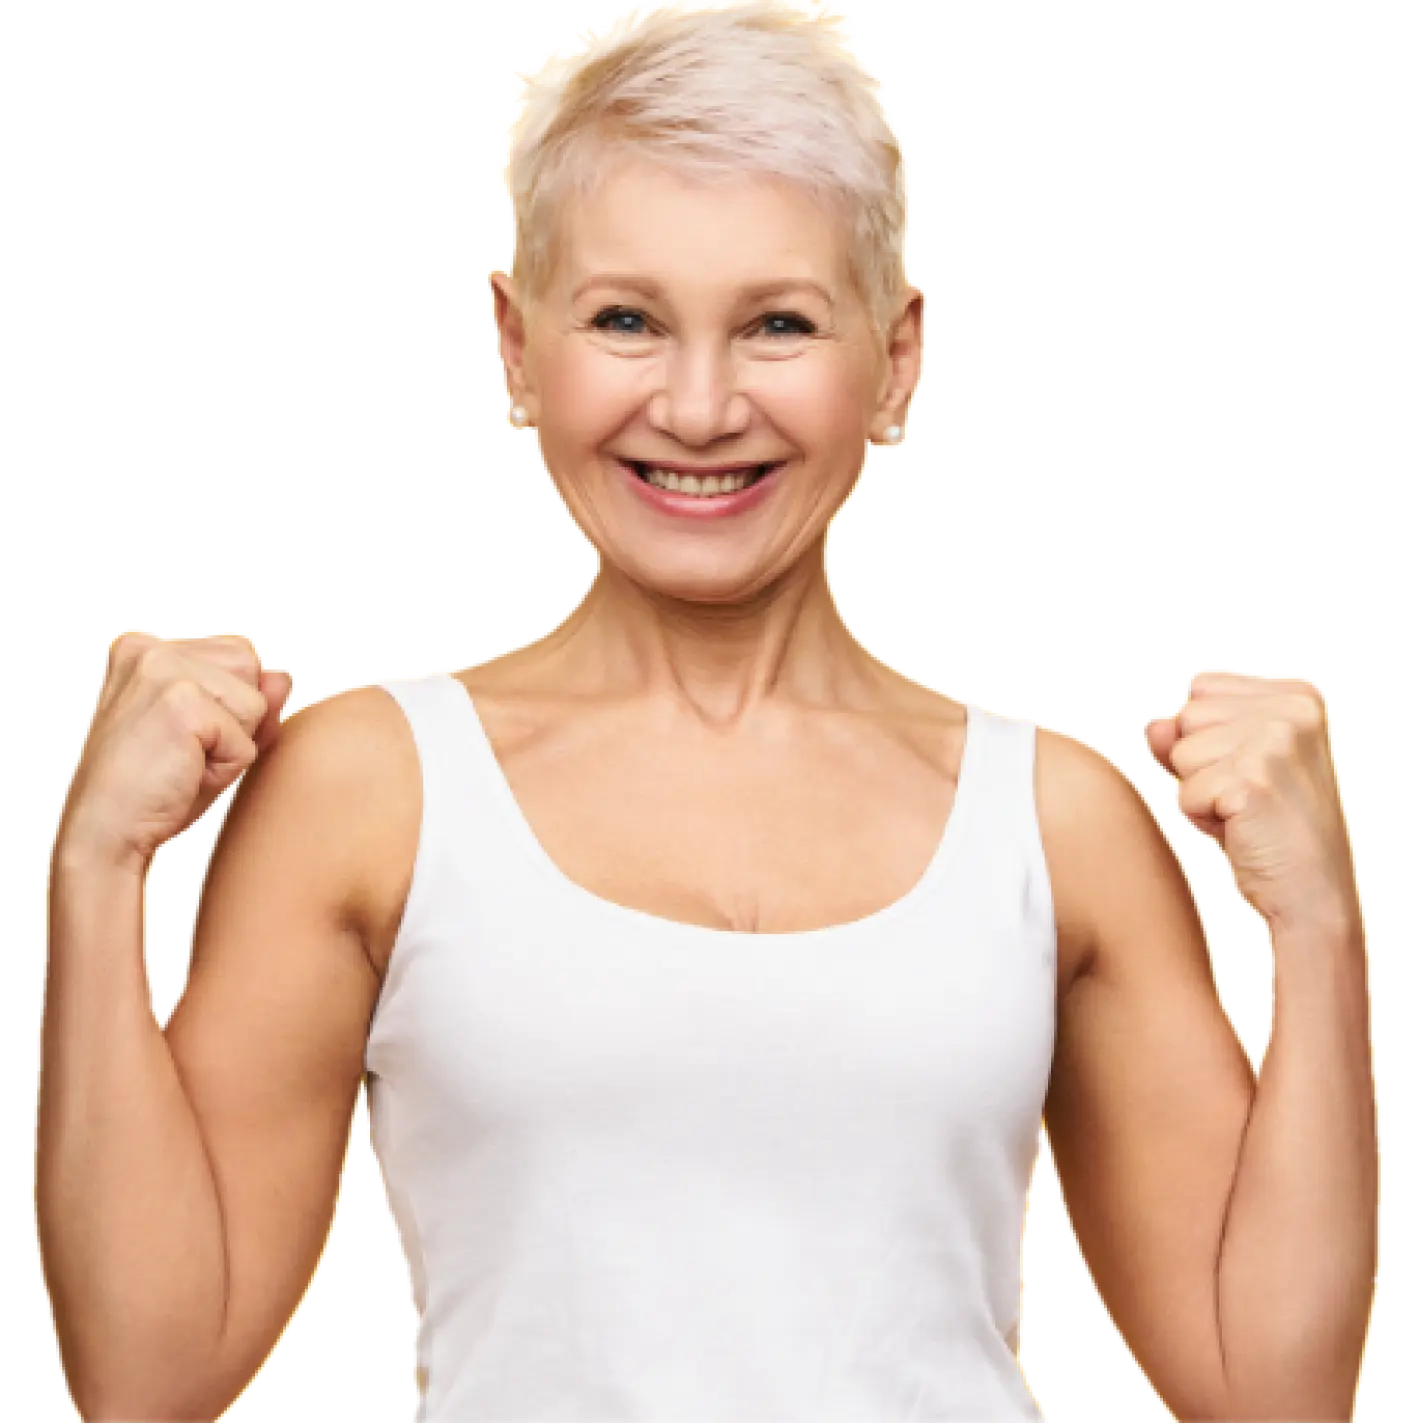 Fit elderly lady with short hair smiles brightly at the camera while holding her fists up in a victory pose